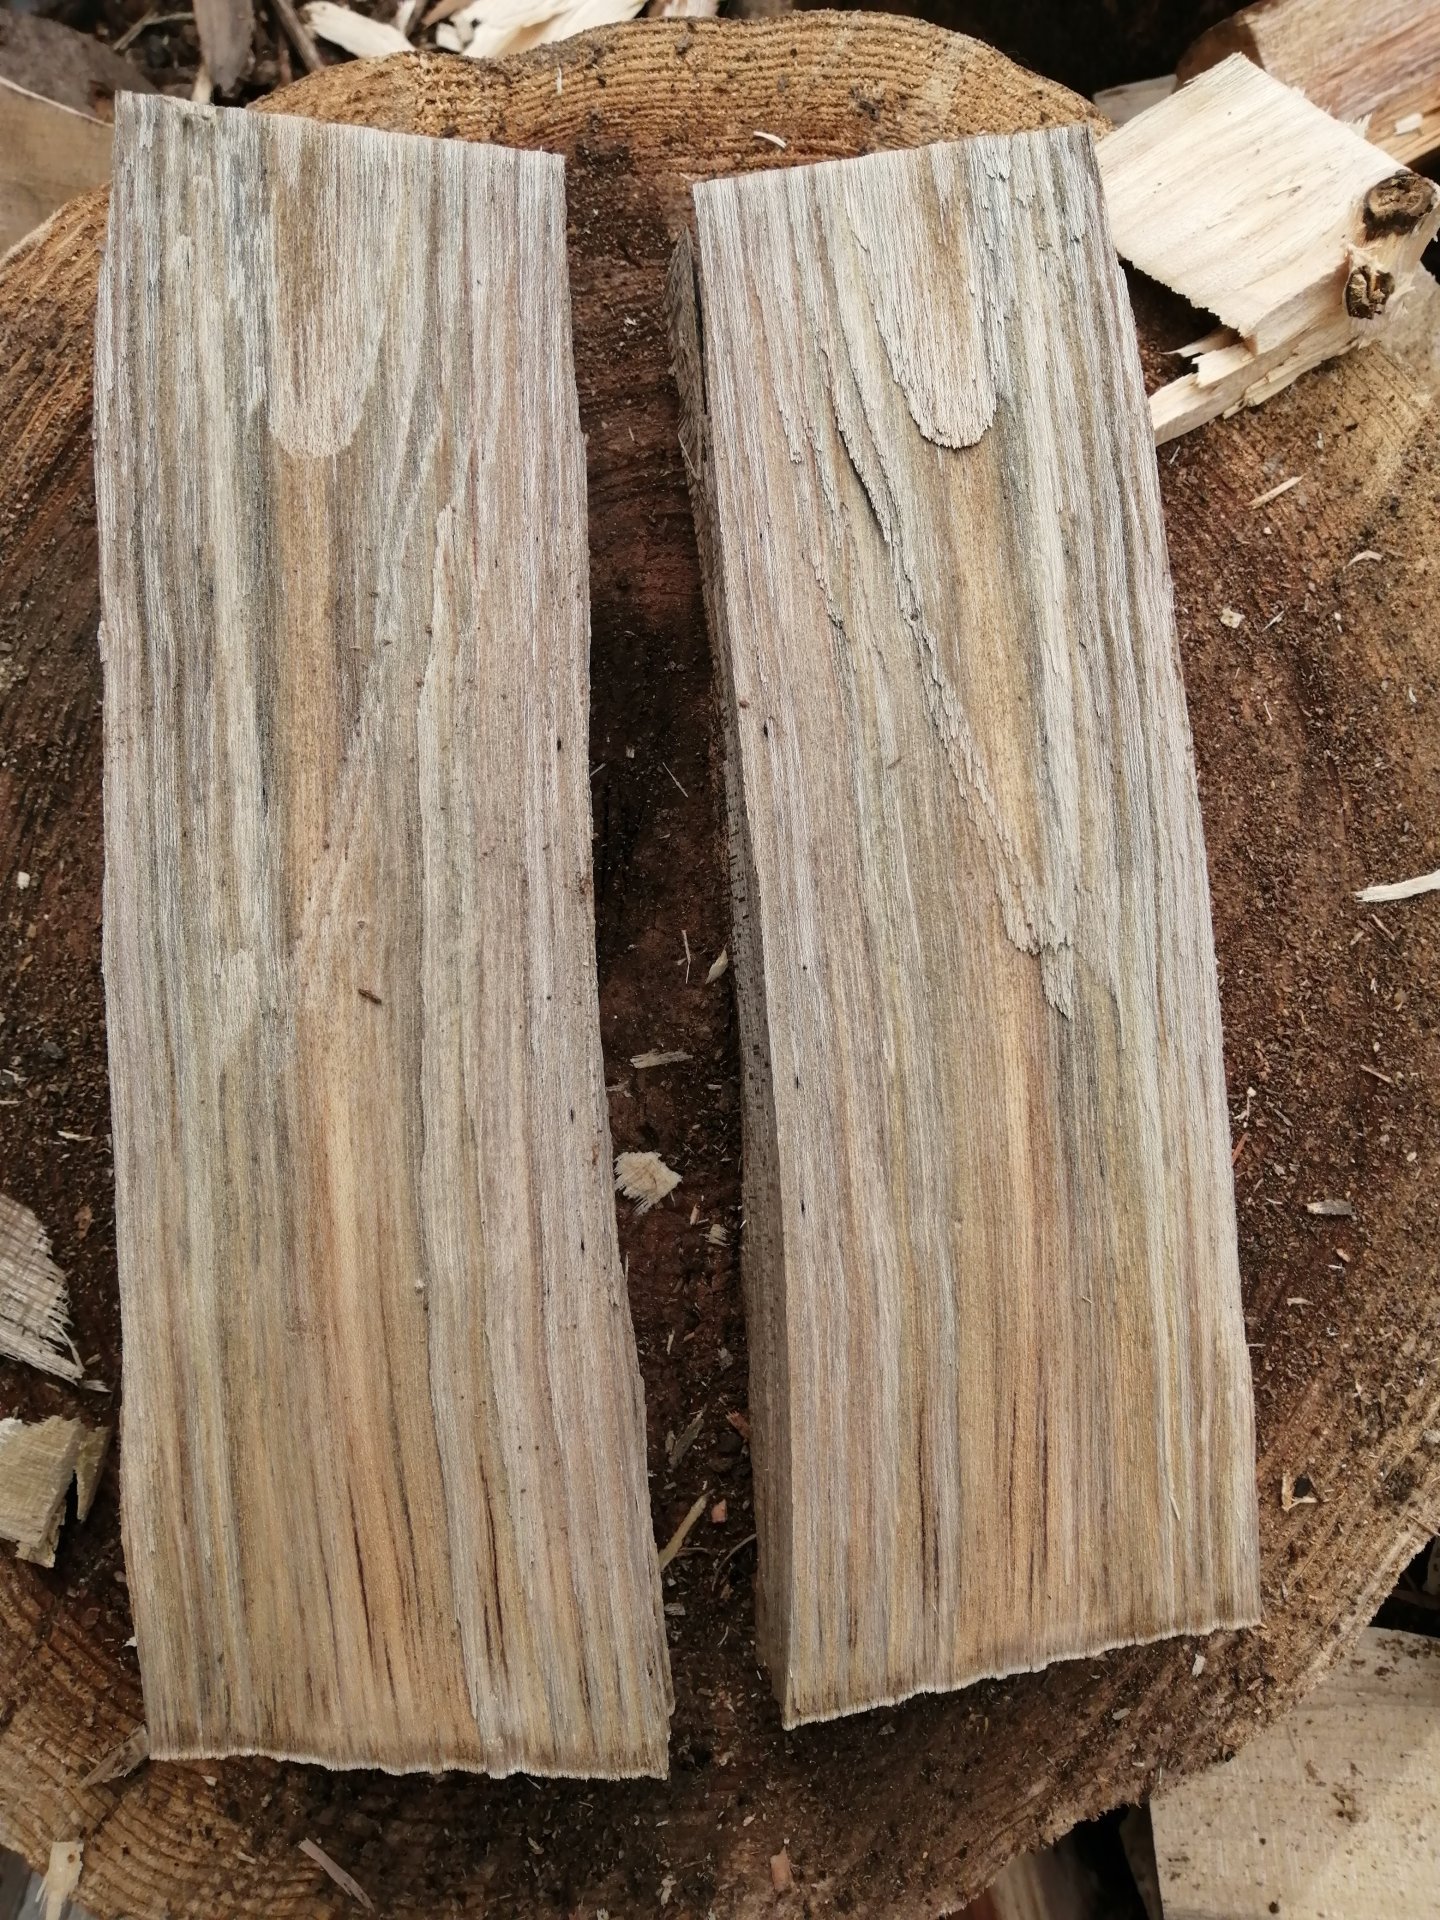 Two future cribbage boards.